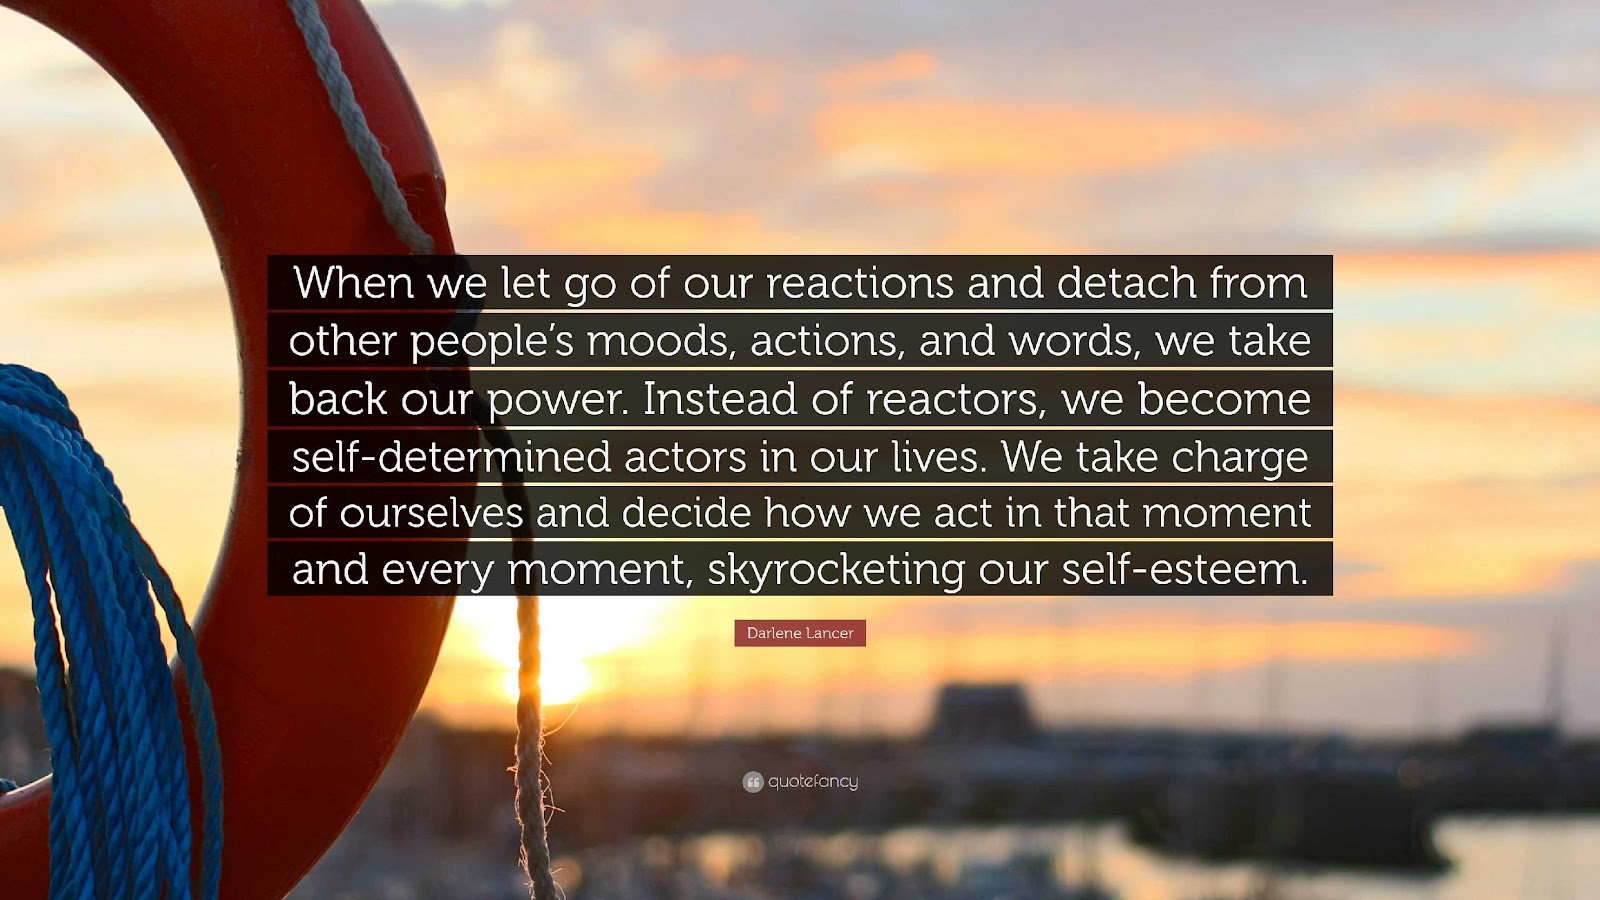 Darlene Lancer Quote: “When we let go of our reactions and detach from  other people's moods, actions, and words, we take back our power. Instea...”